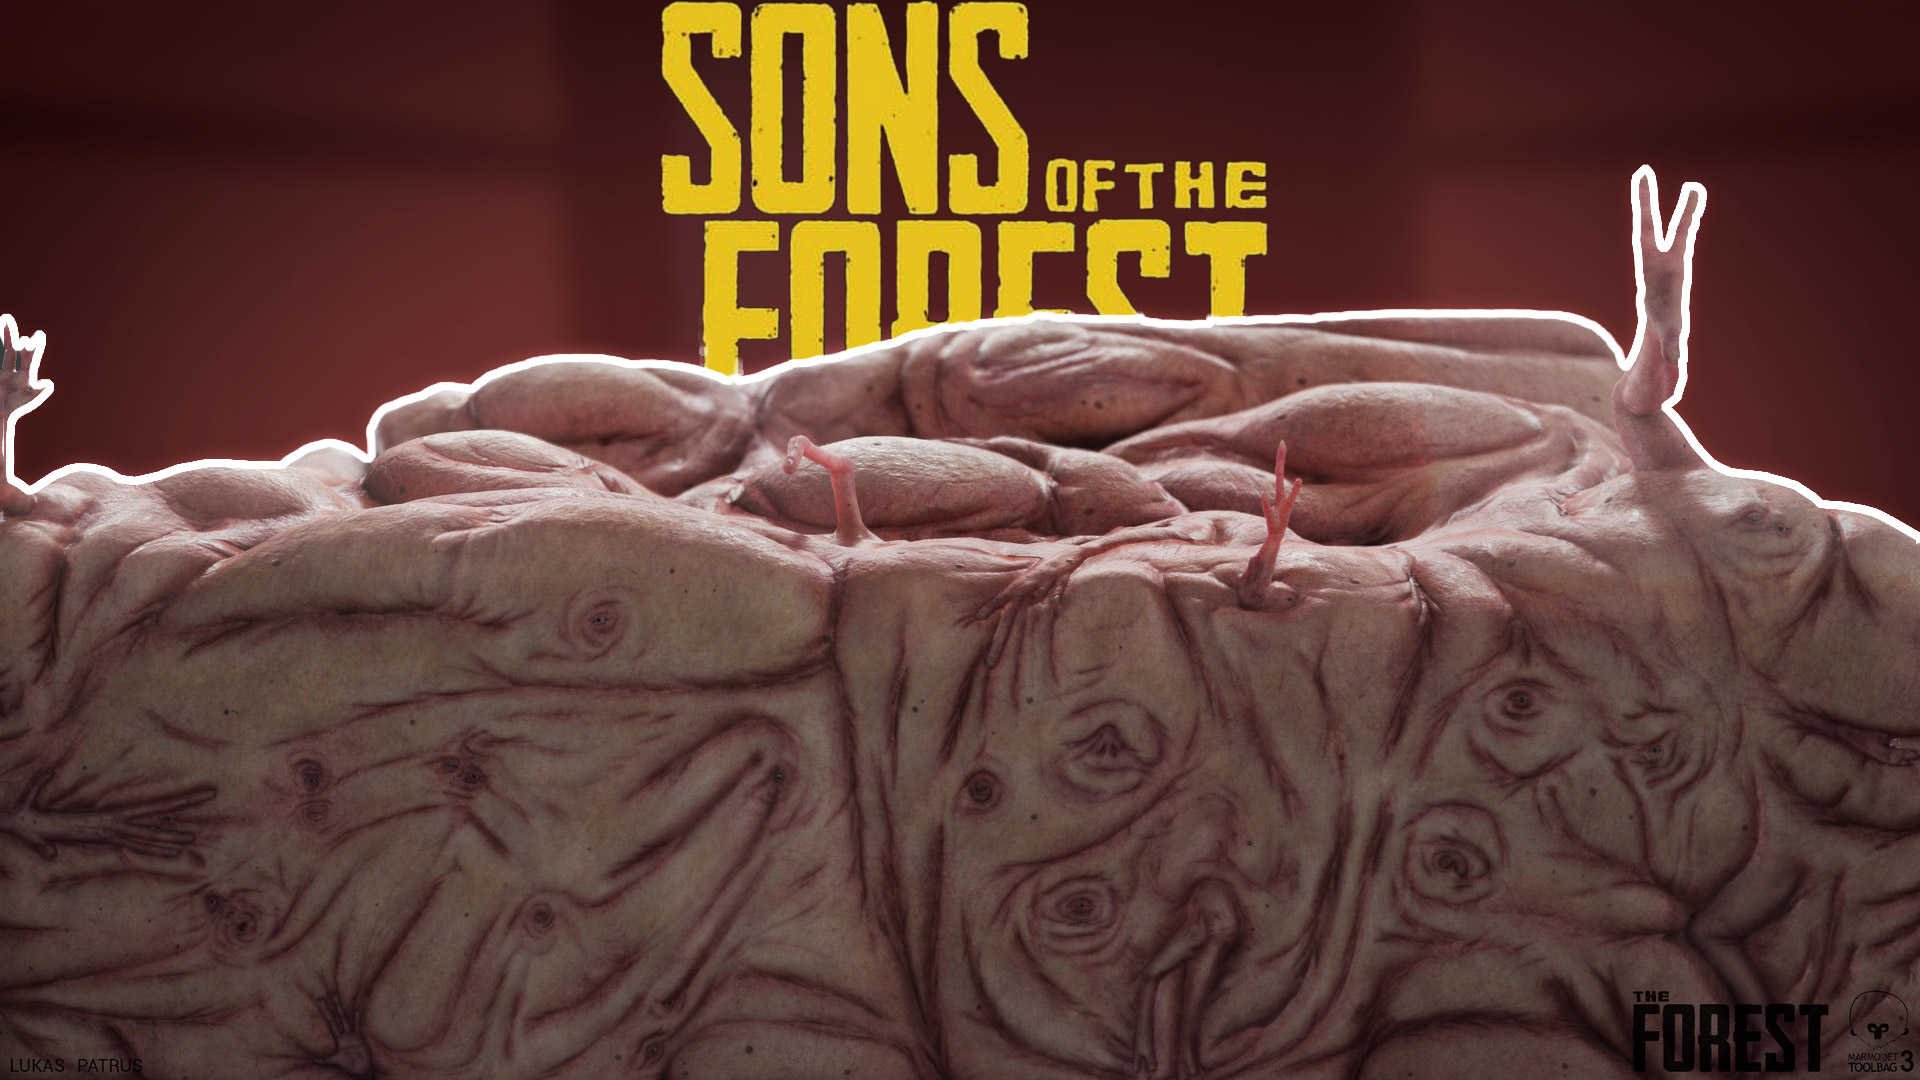 Sons of the forest рецепты